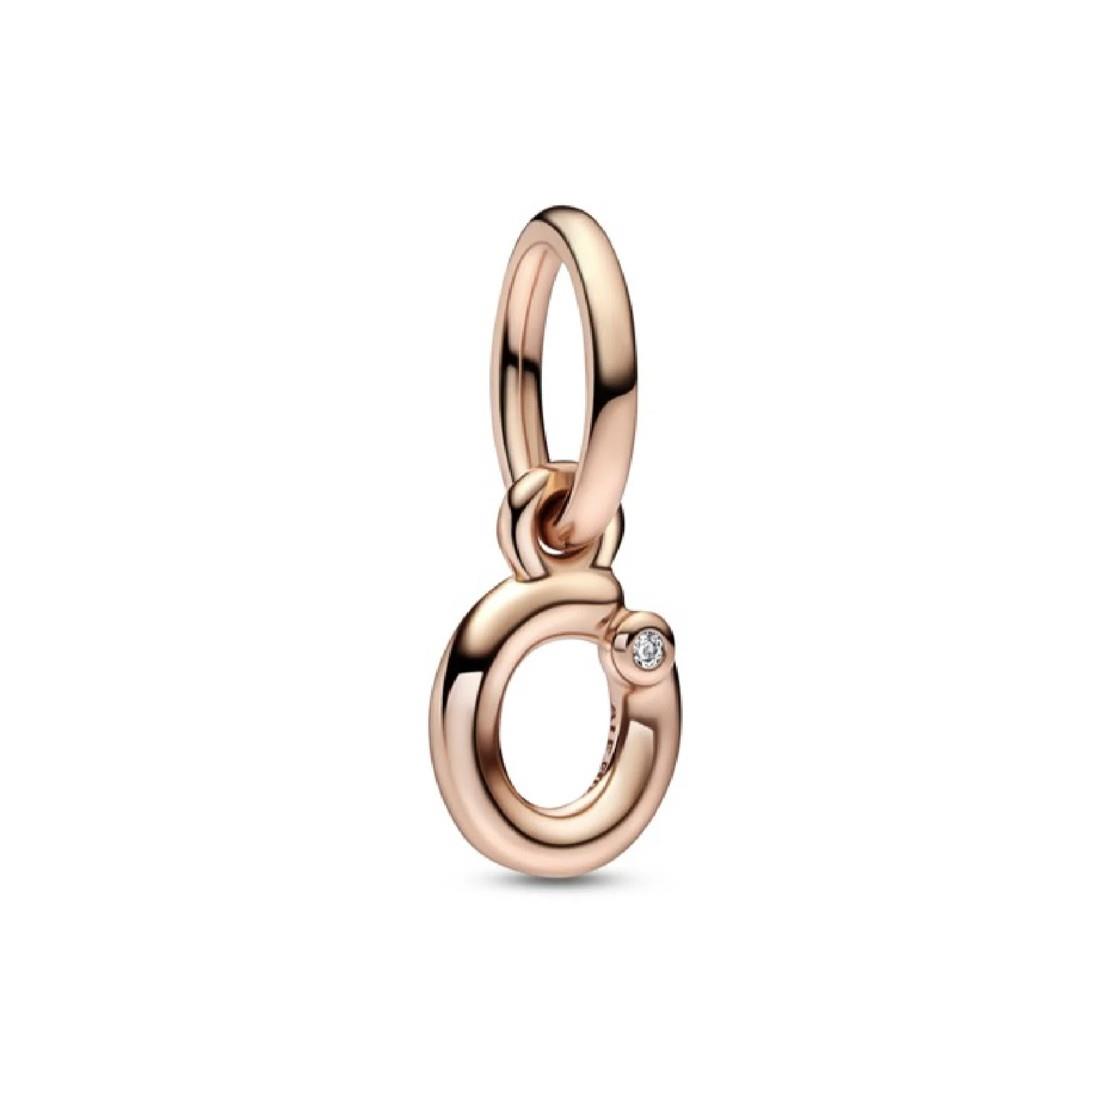 Alphabet pendant charm with letter O in rose gold plating - PANDORA